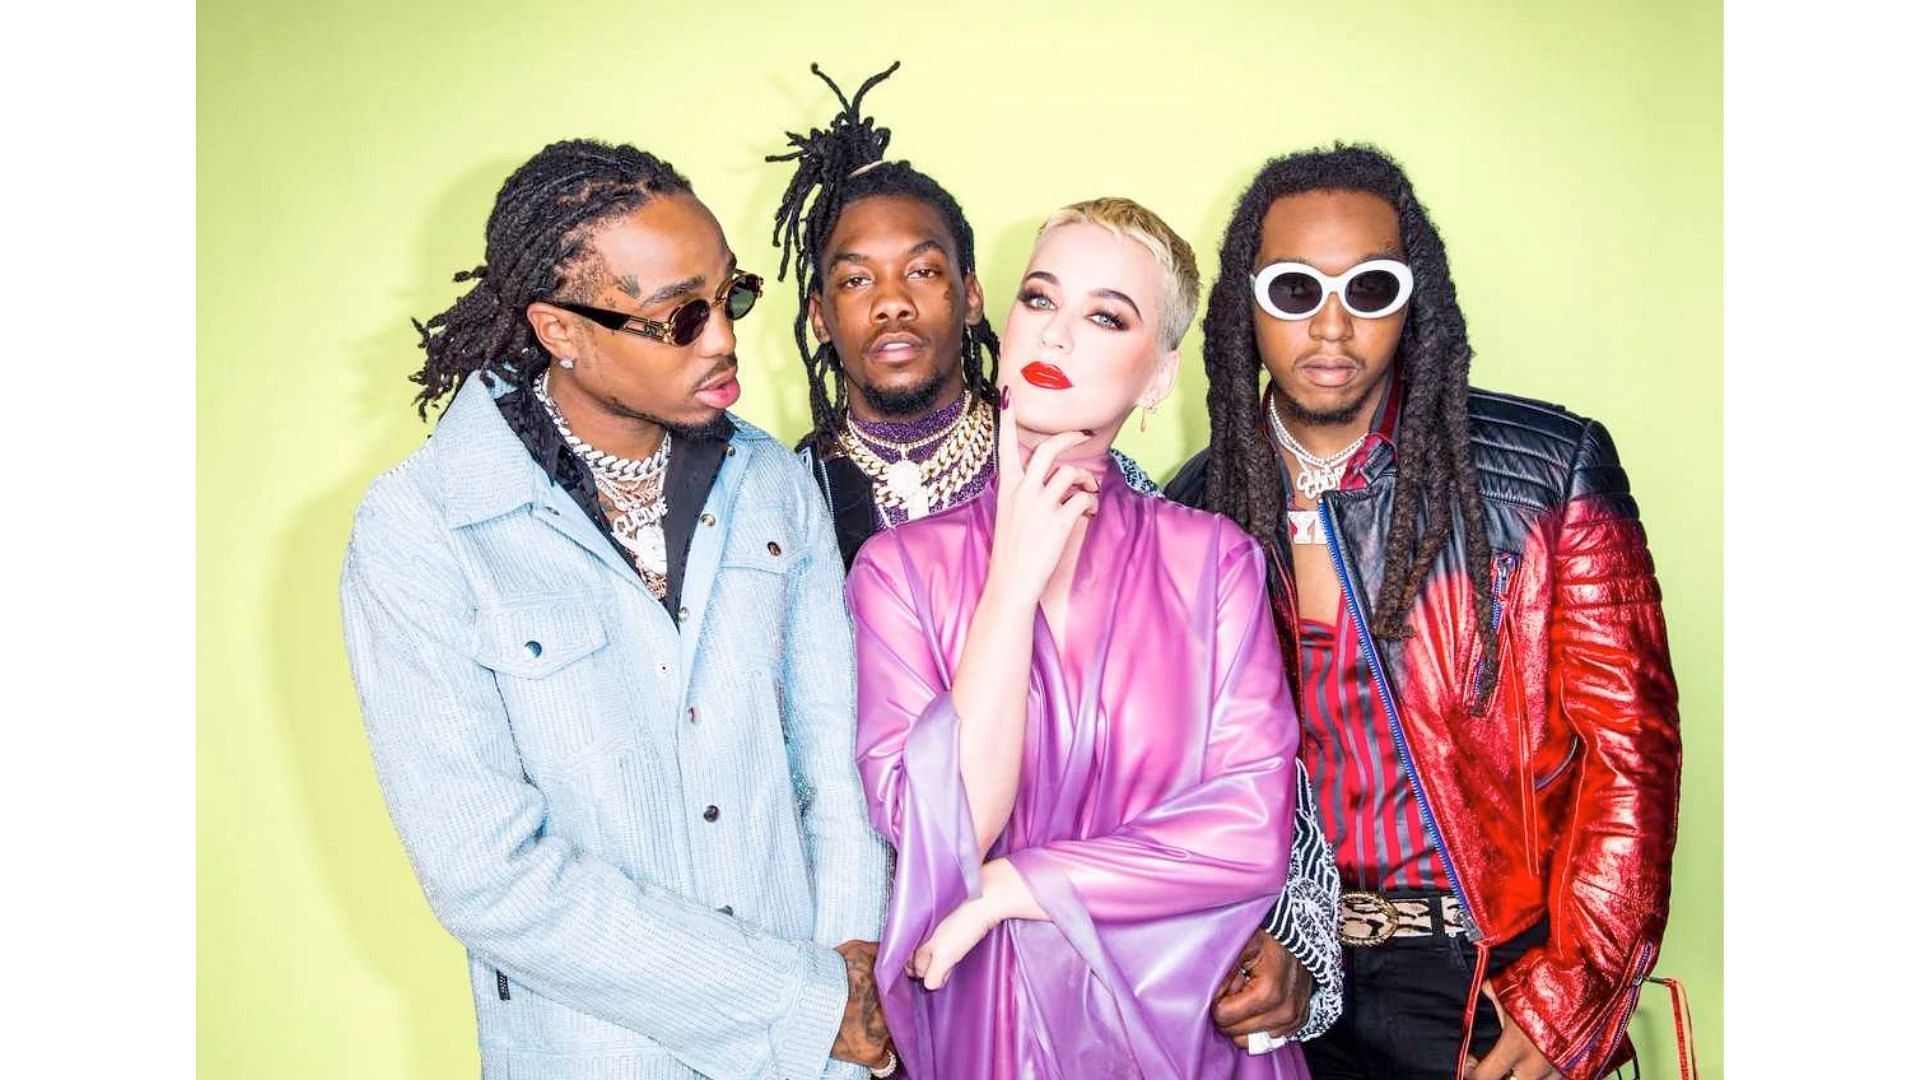 Katy Perry and Takeoff dating rumors explored